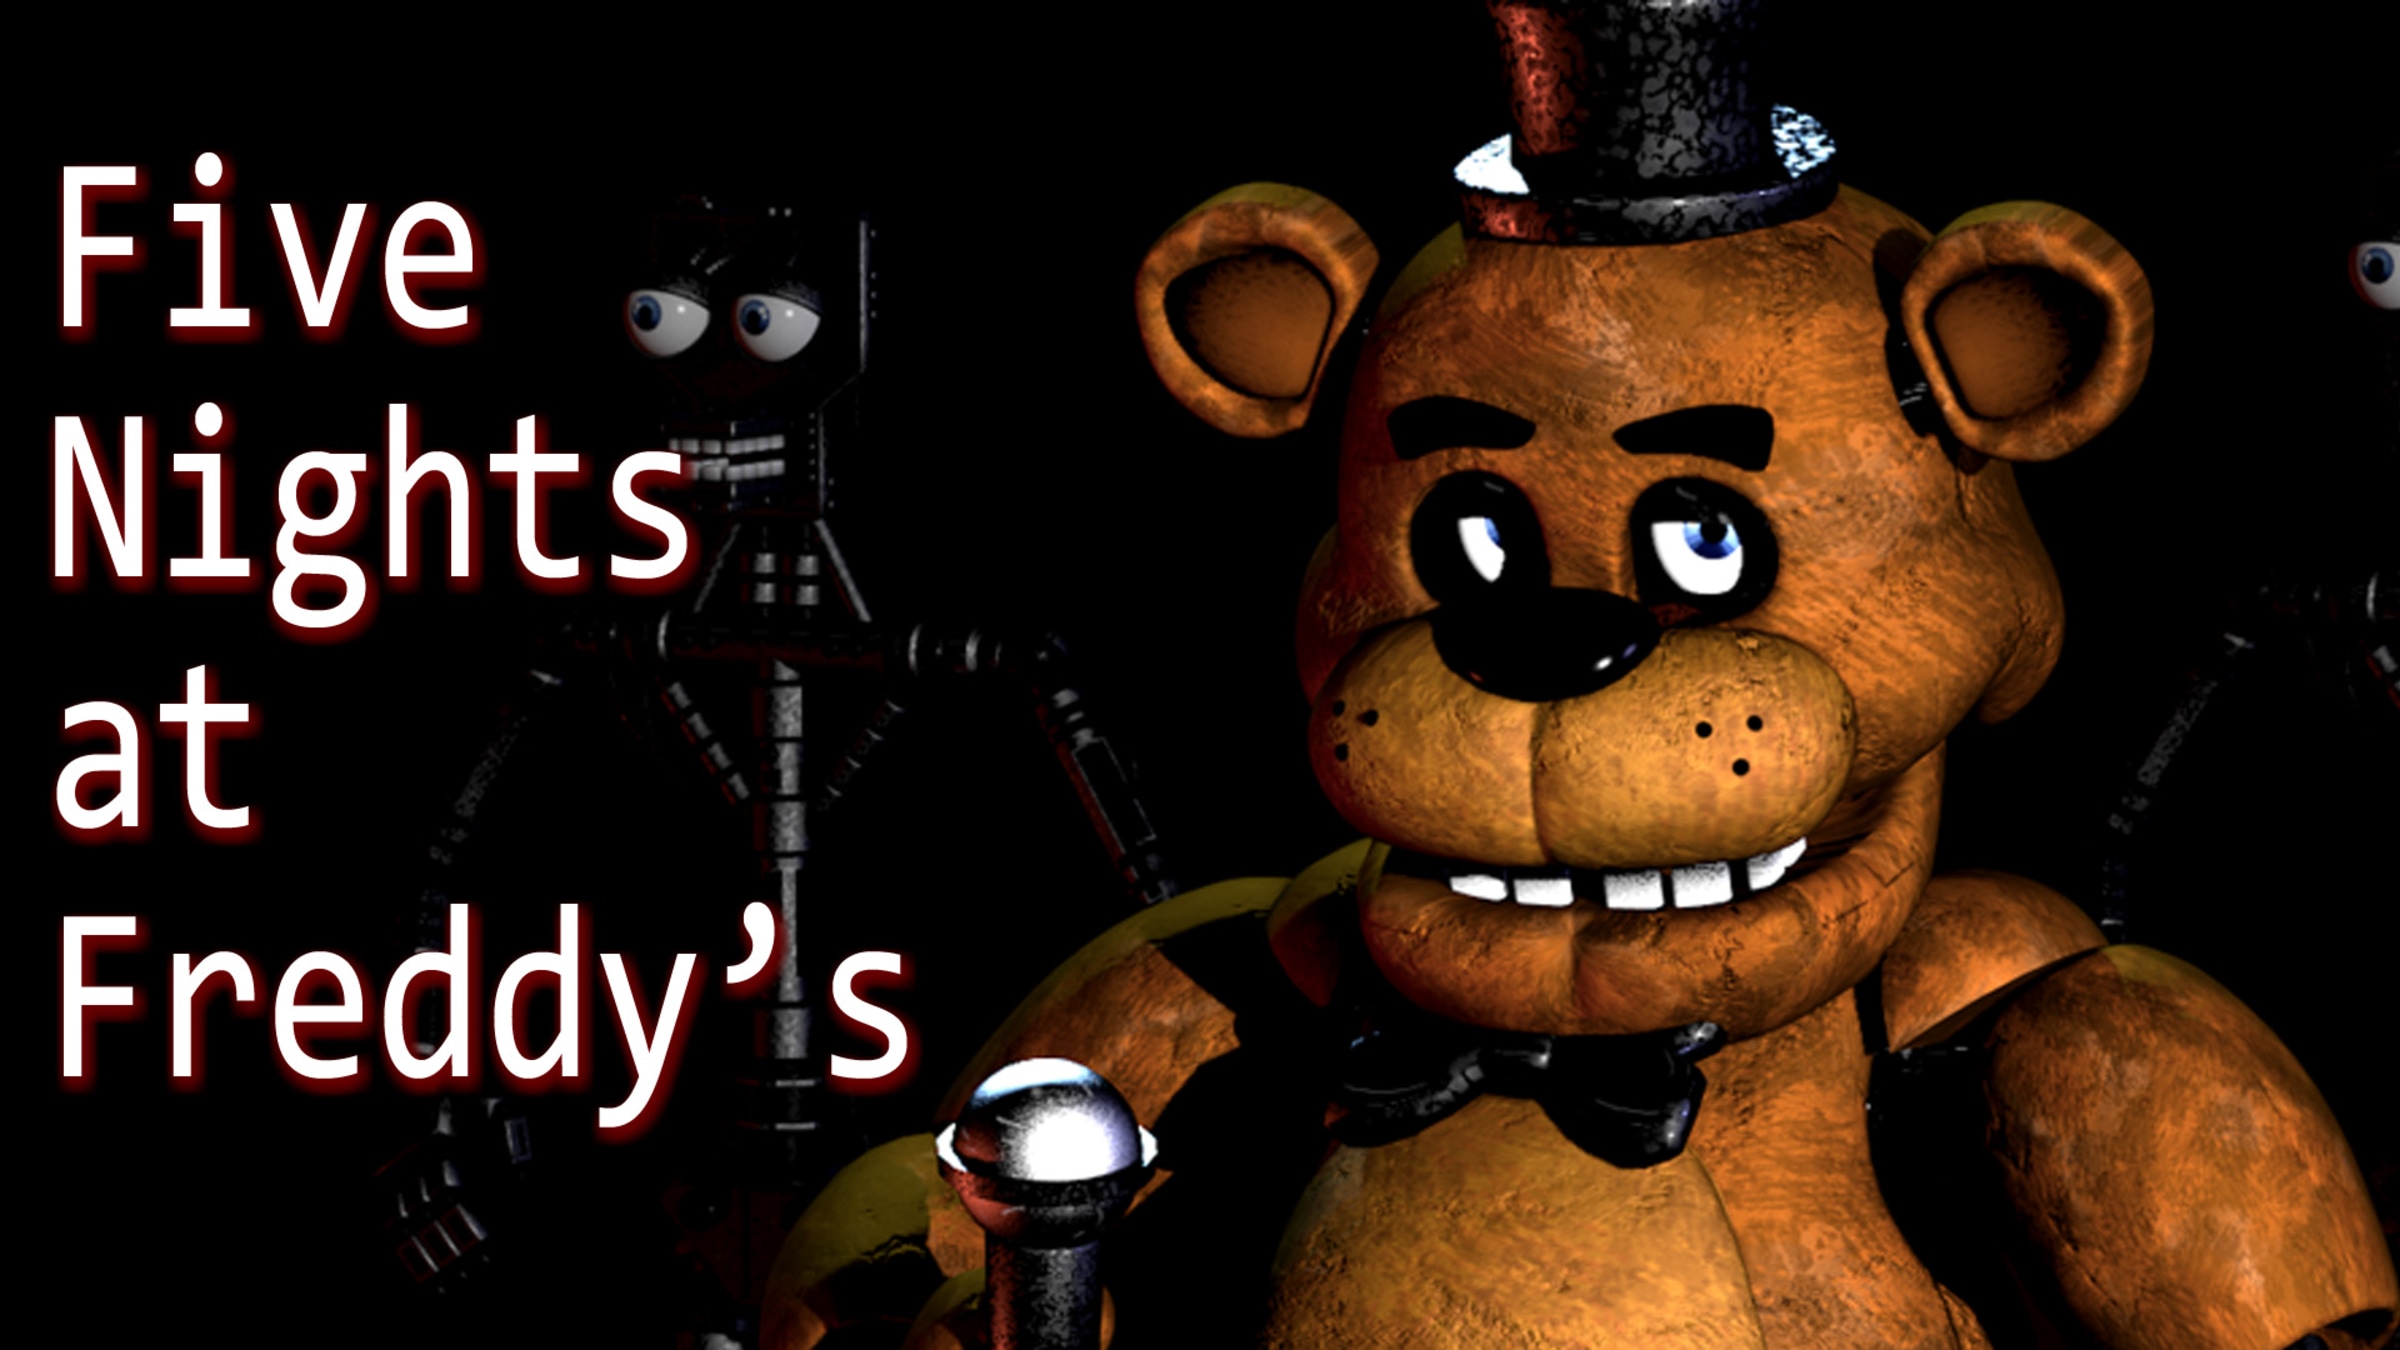 alain rowald fajatin recommends Picture Of Five Nights At Freddys